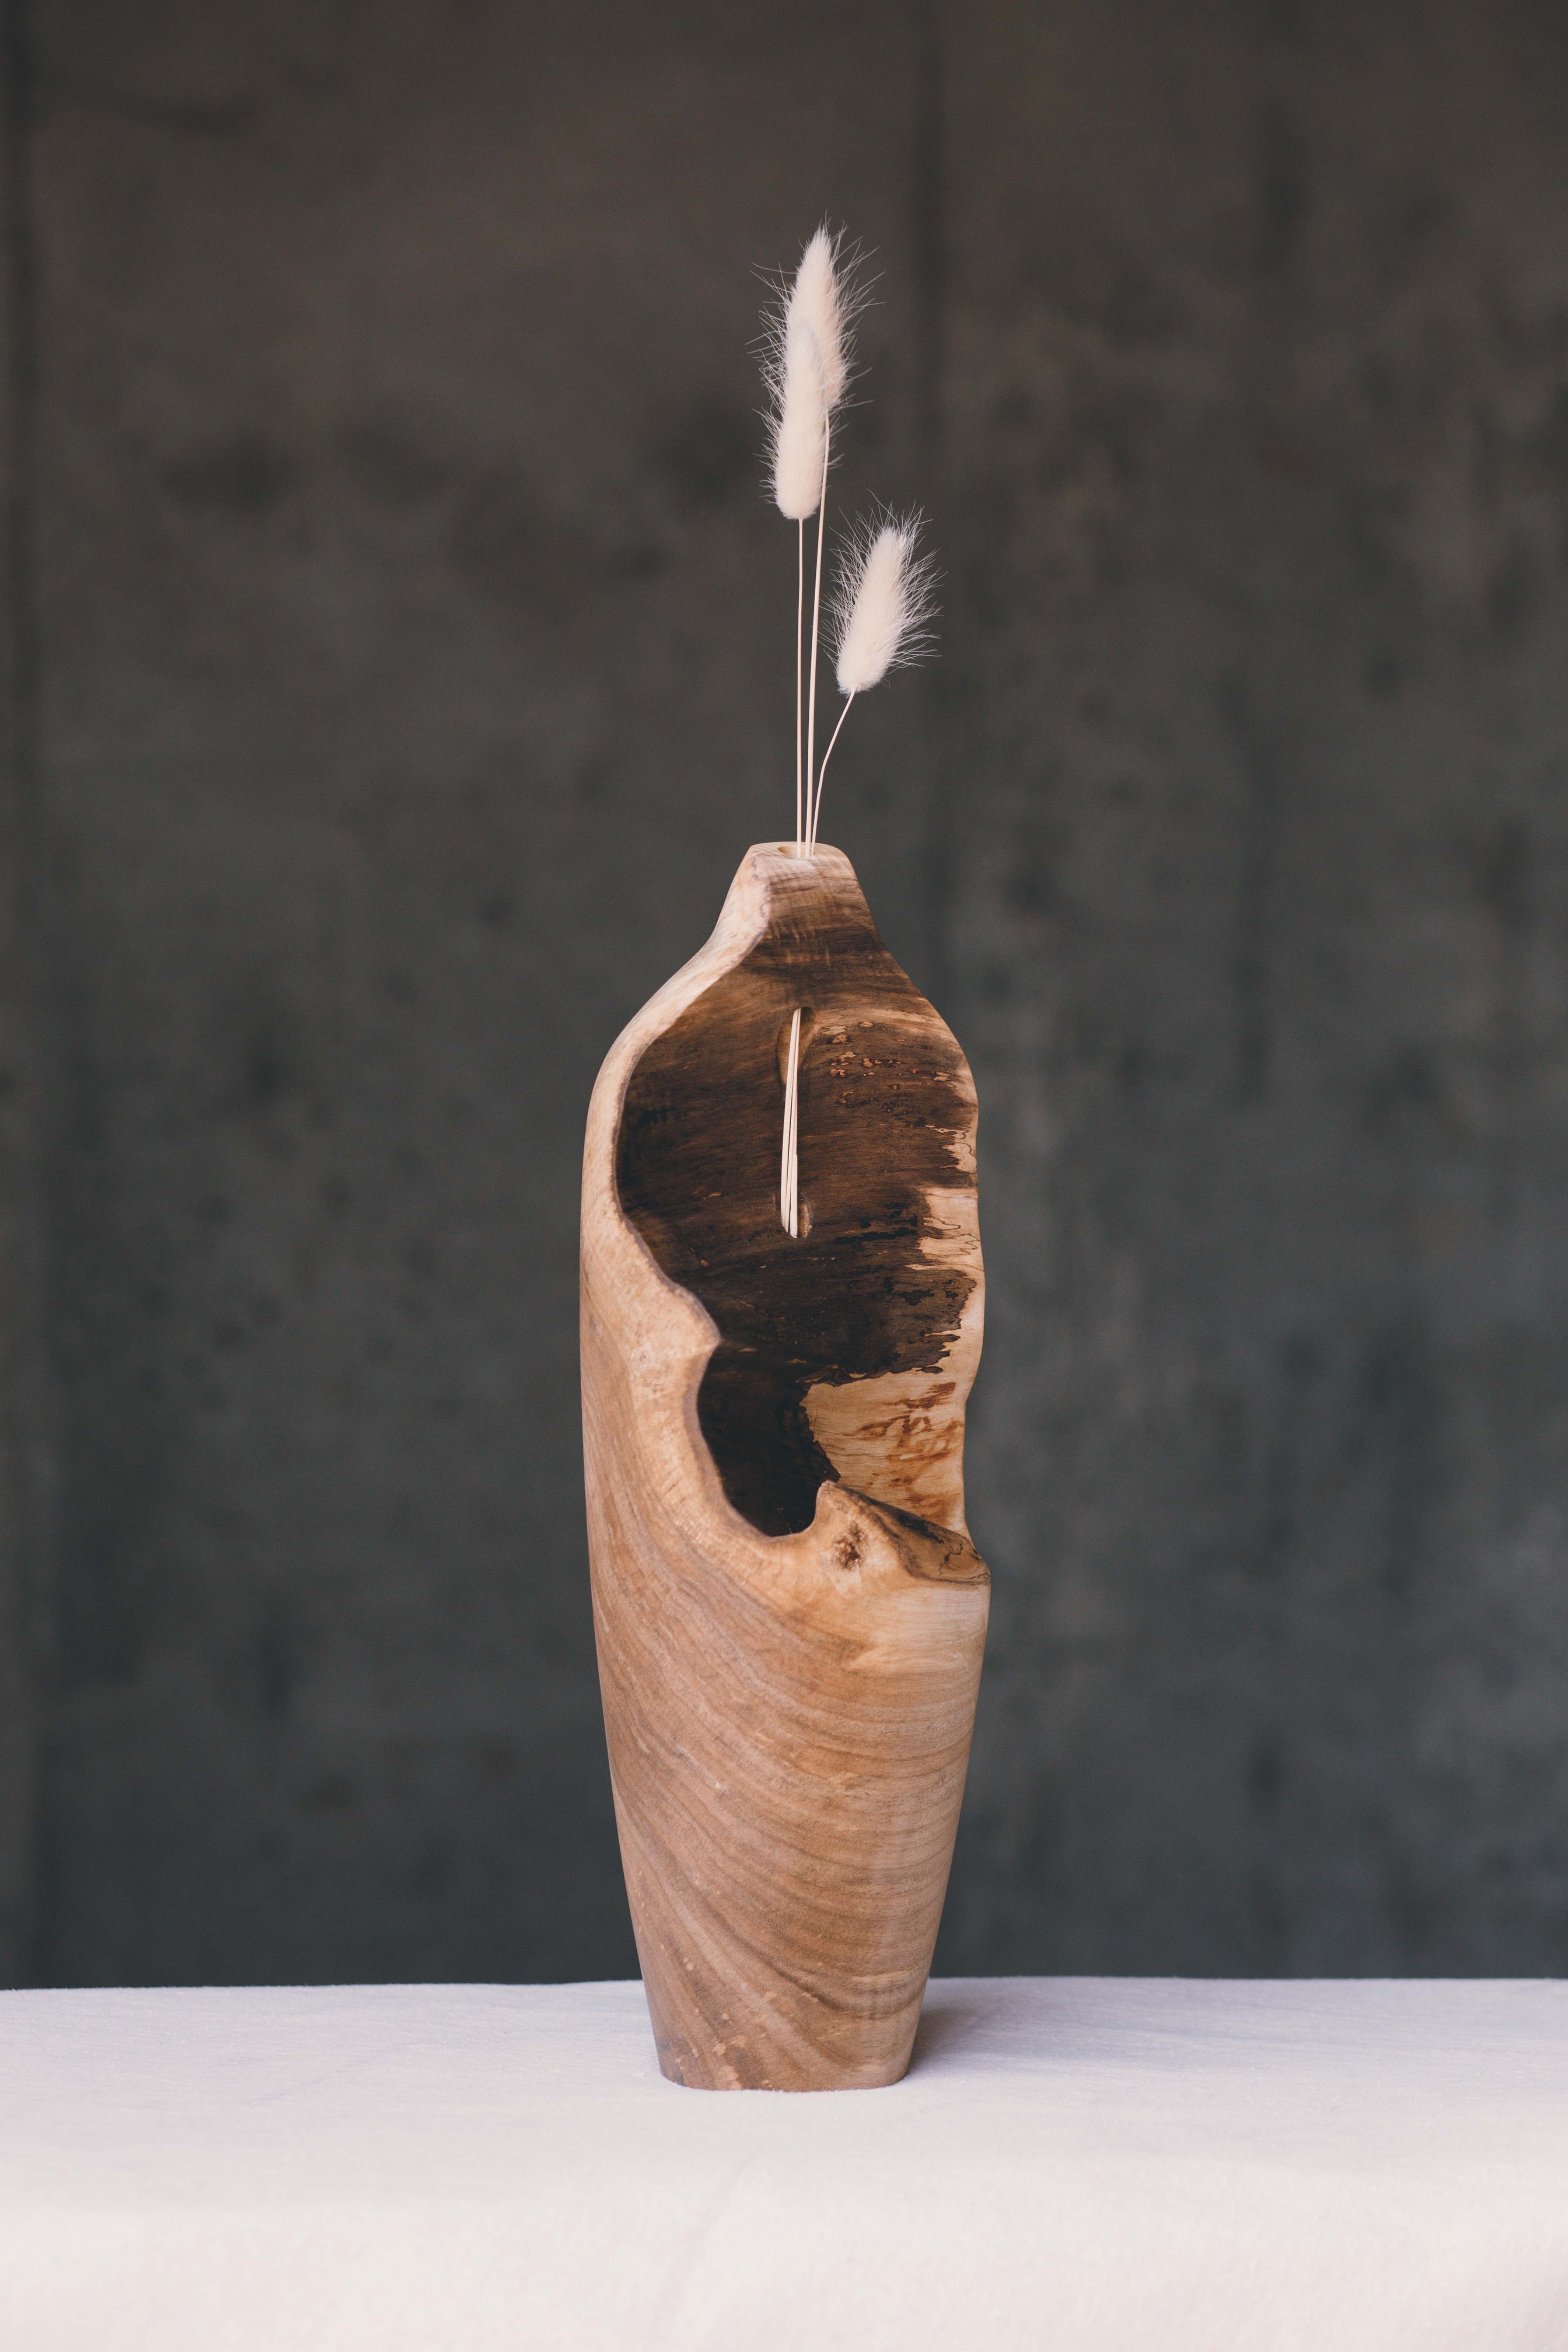 A tall wooden bud vase with exposed edge and dried flowers.